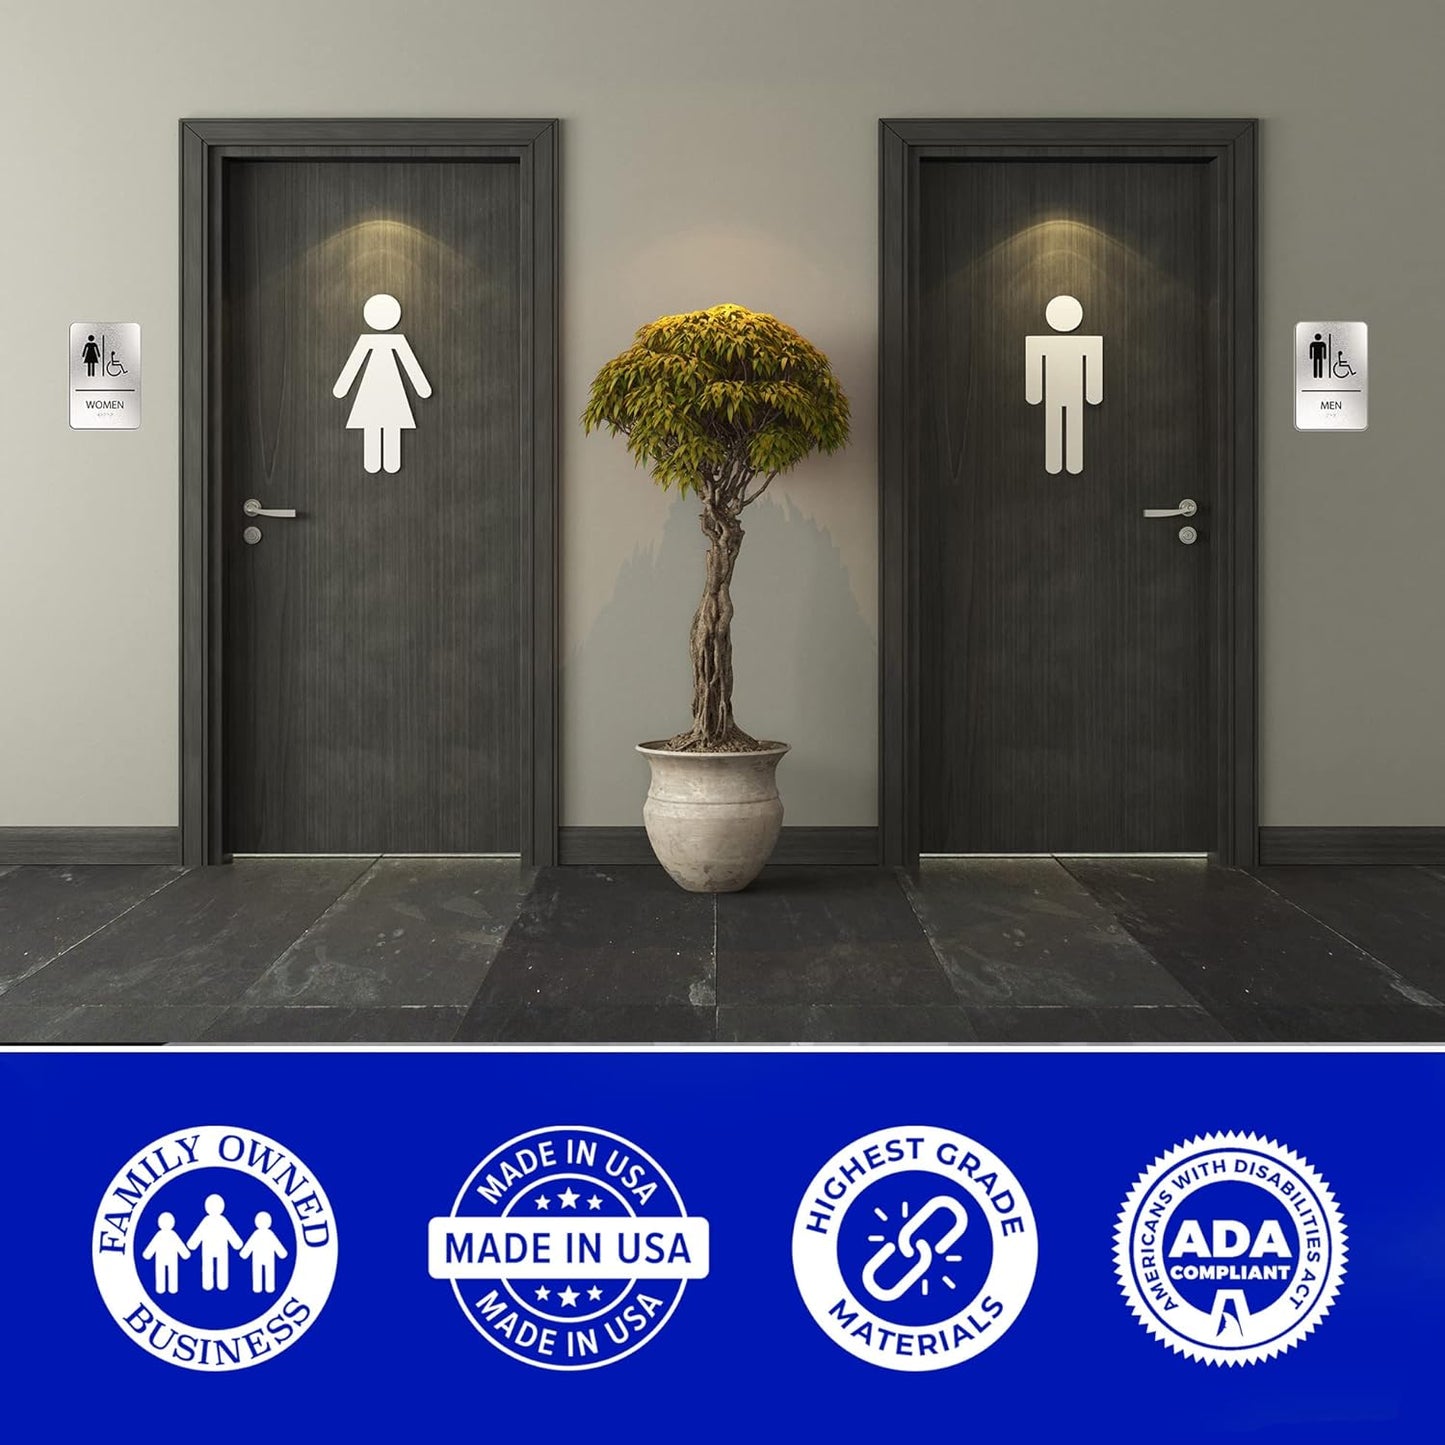 ADA Restroom Sign | All Gender Wheelchair Accessible| 6x9 inches